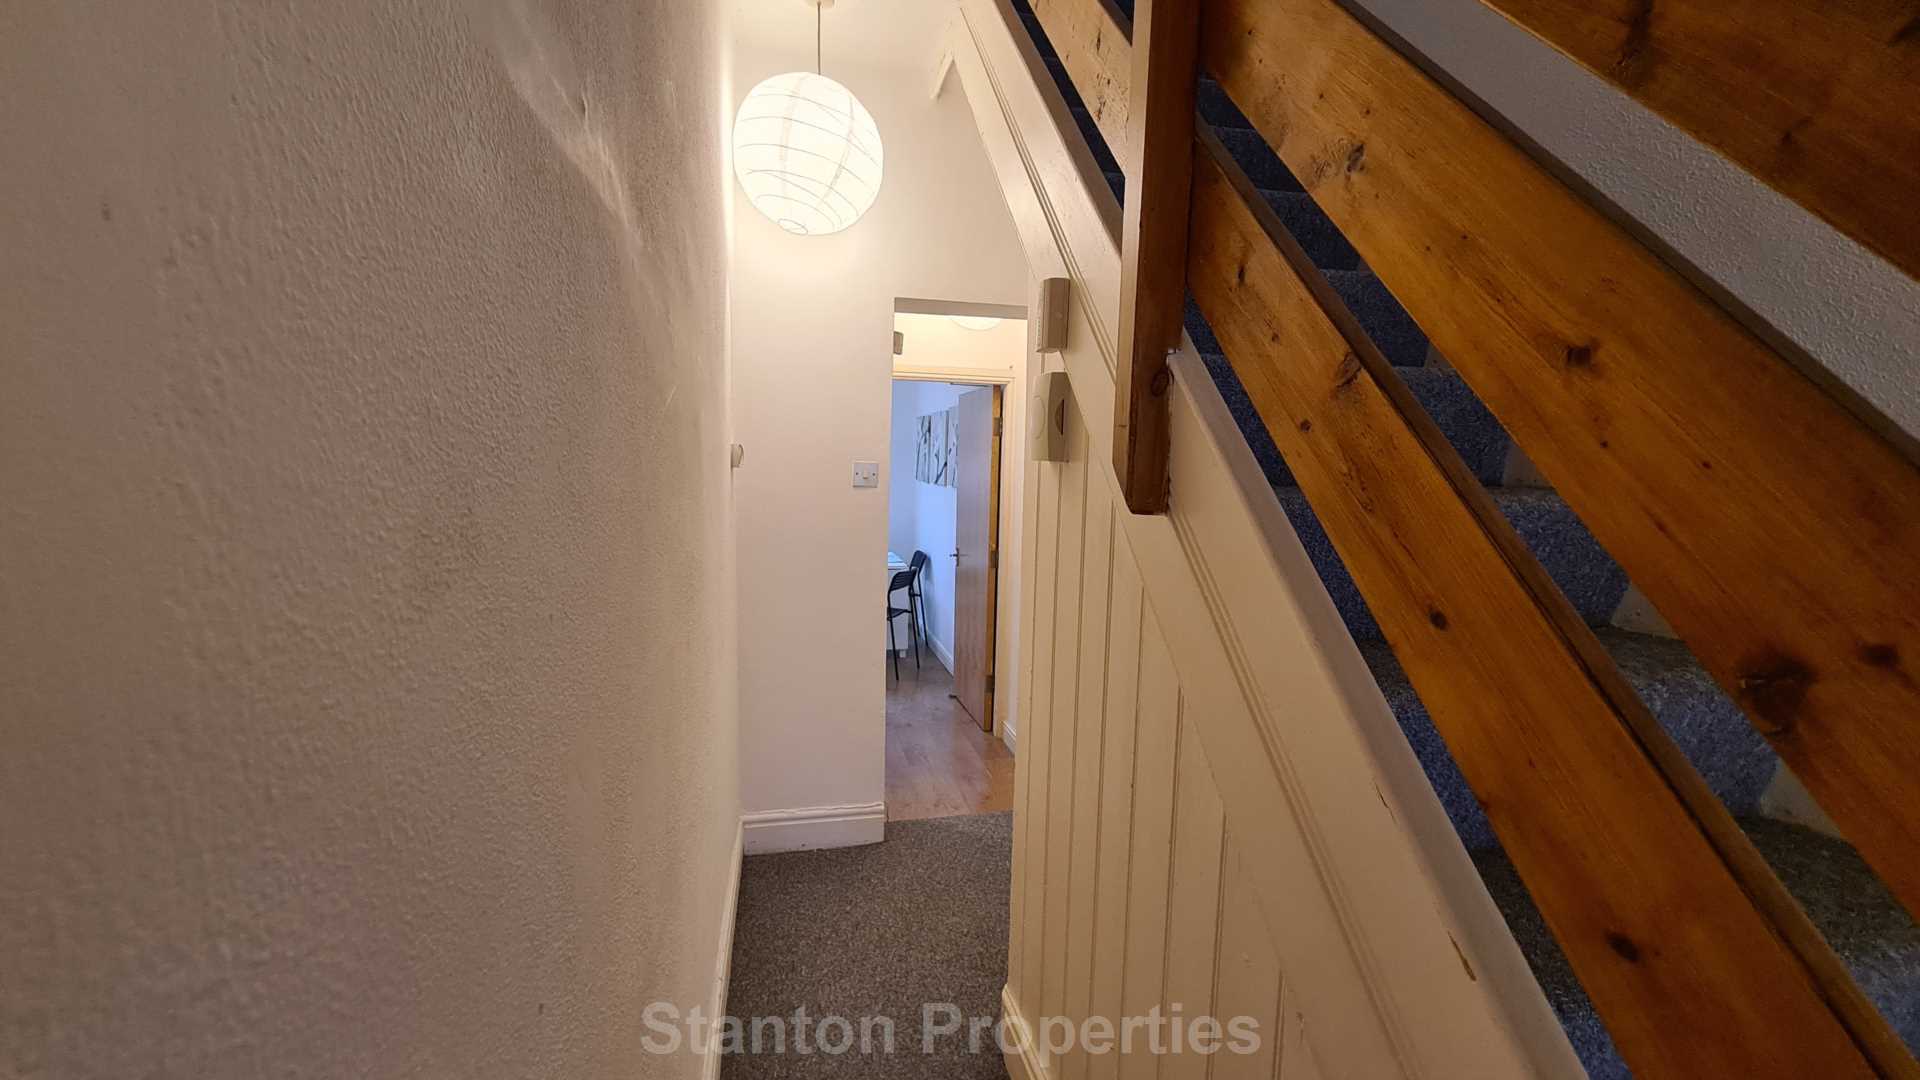 £130 pppw, See Video Tour, Mabfield Road, Fallowfield, Image 10